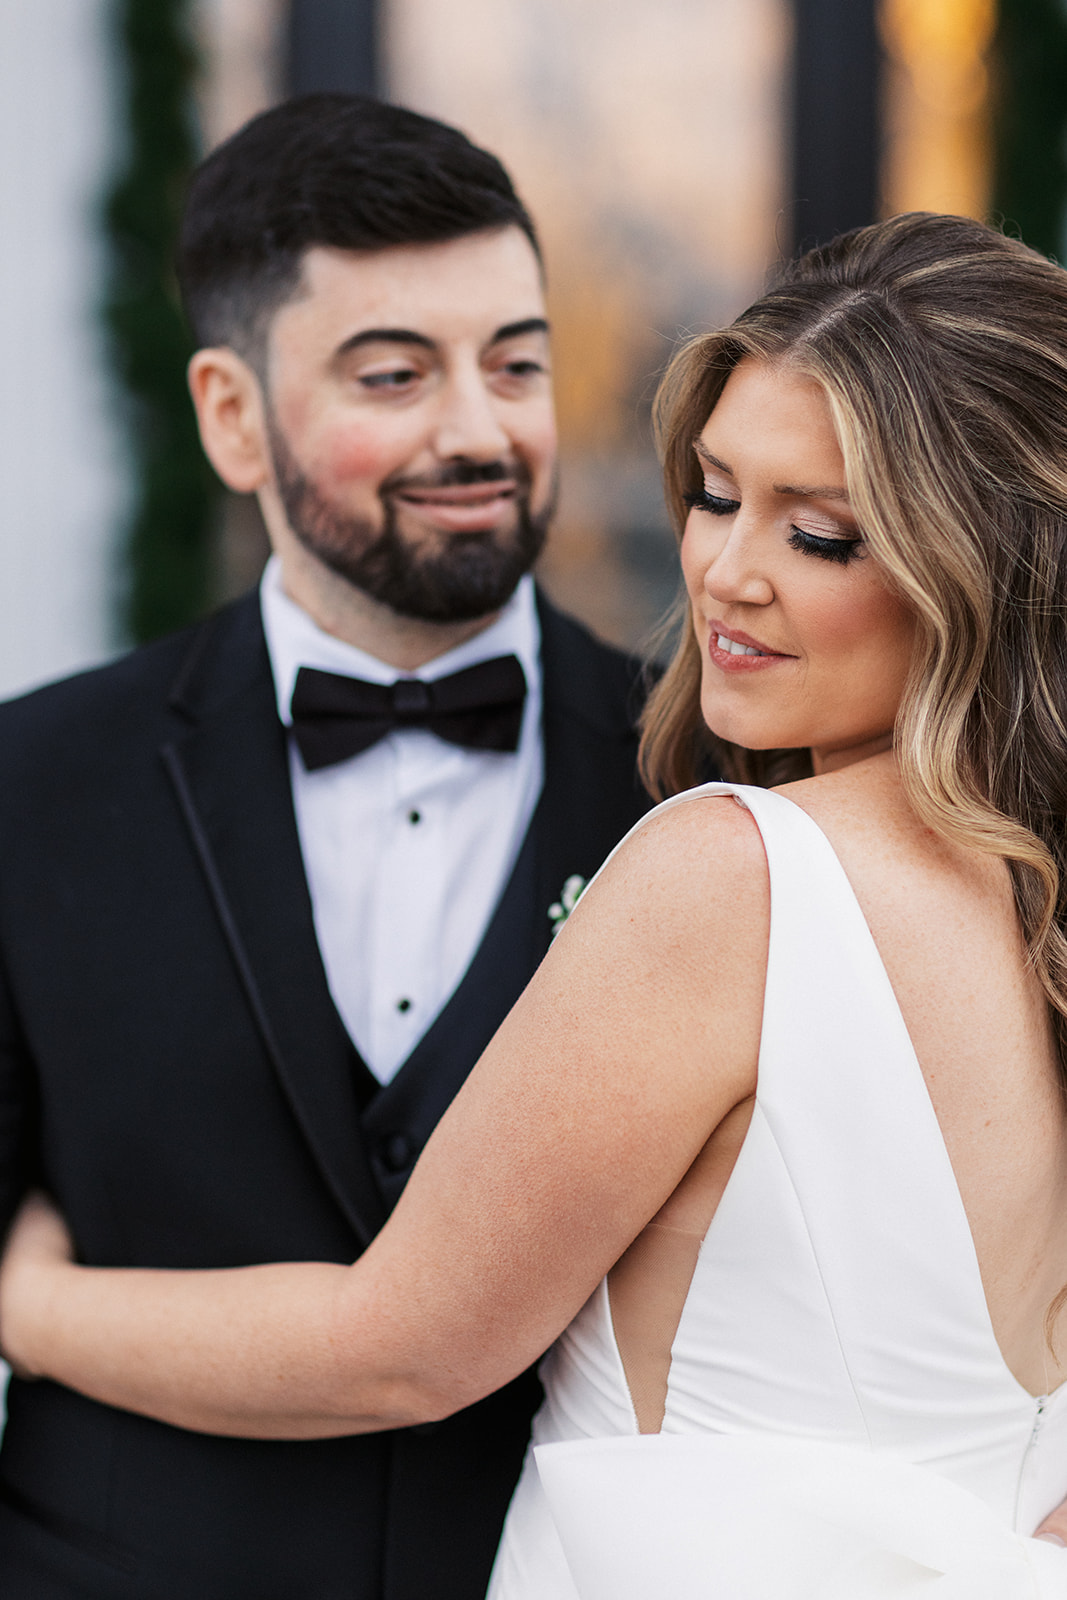 Newlyweds dance in a black tux and white silk dress outside